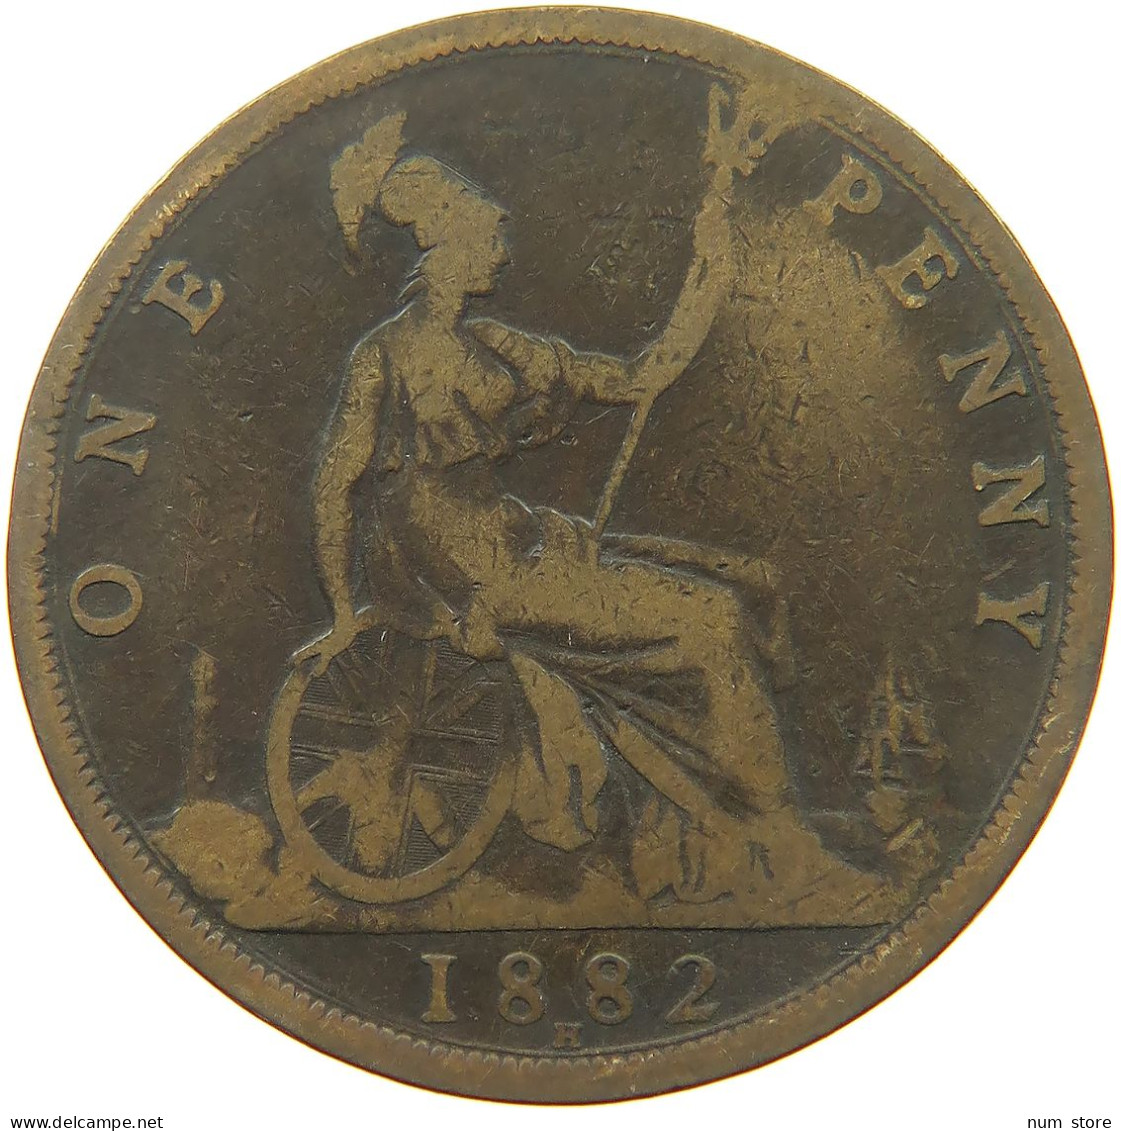 GREAT BRITAIN PENNY 1882 H Victoria 1837-1901 #a041 0257 - D. 1 Penny